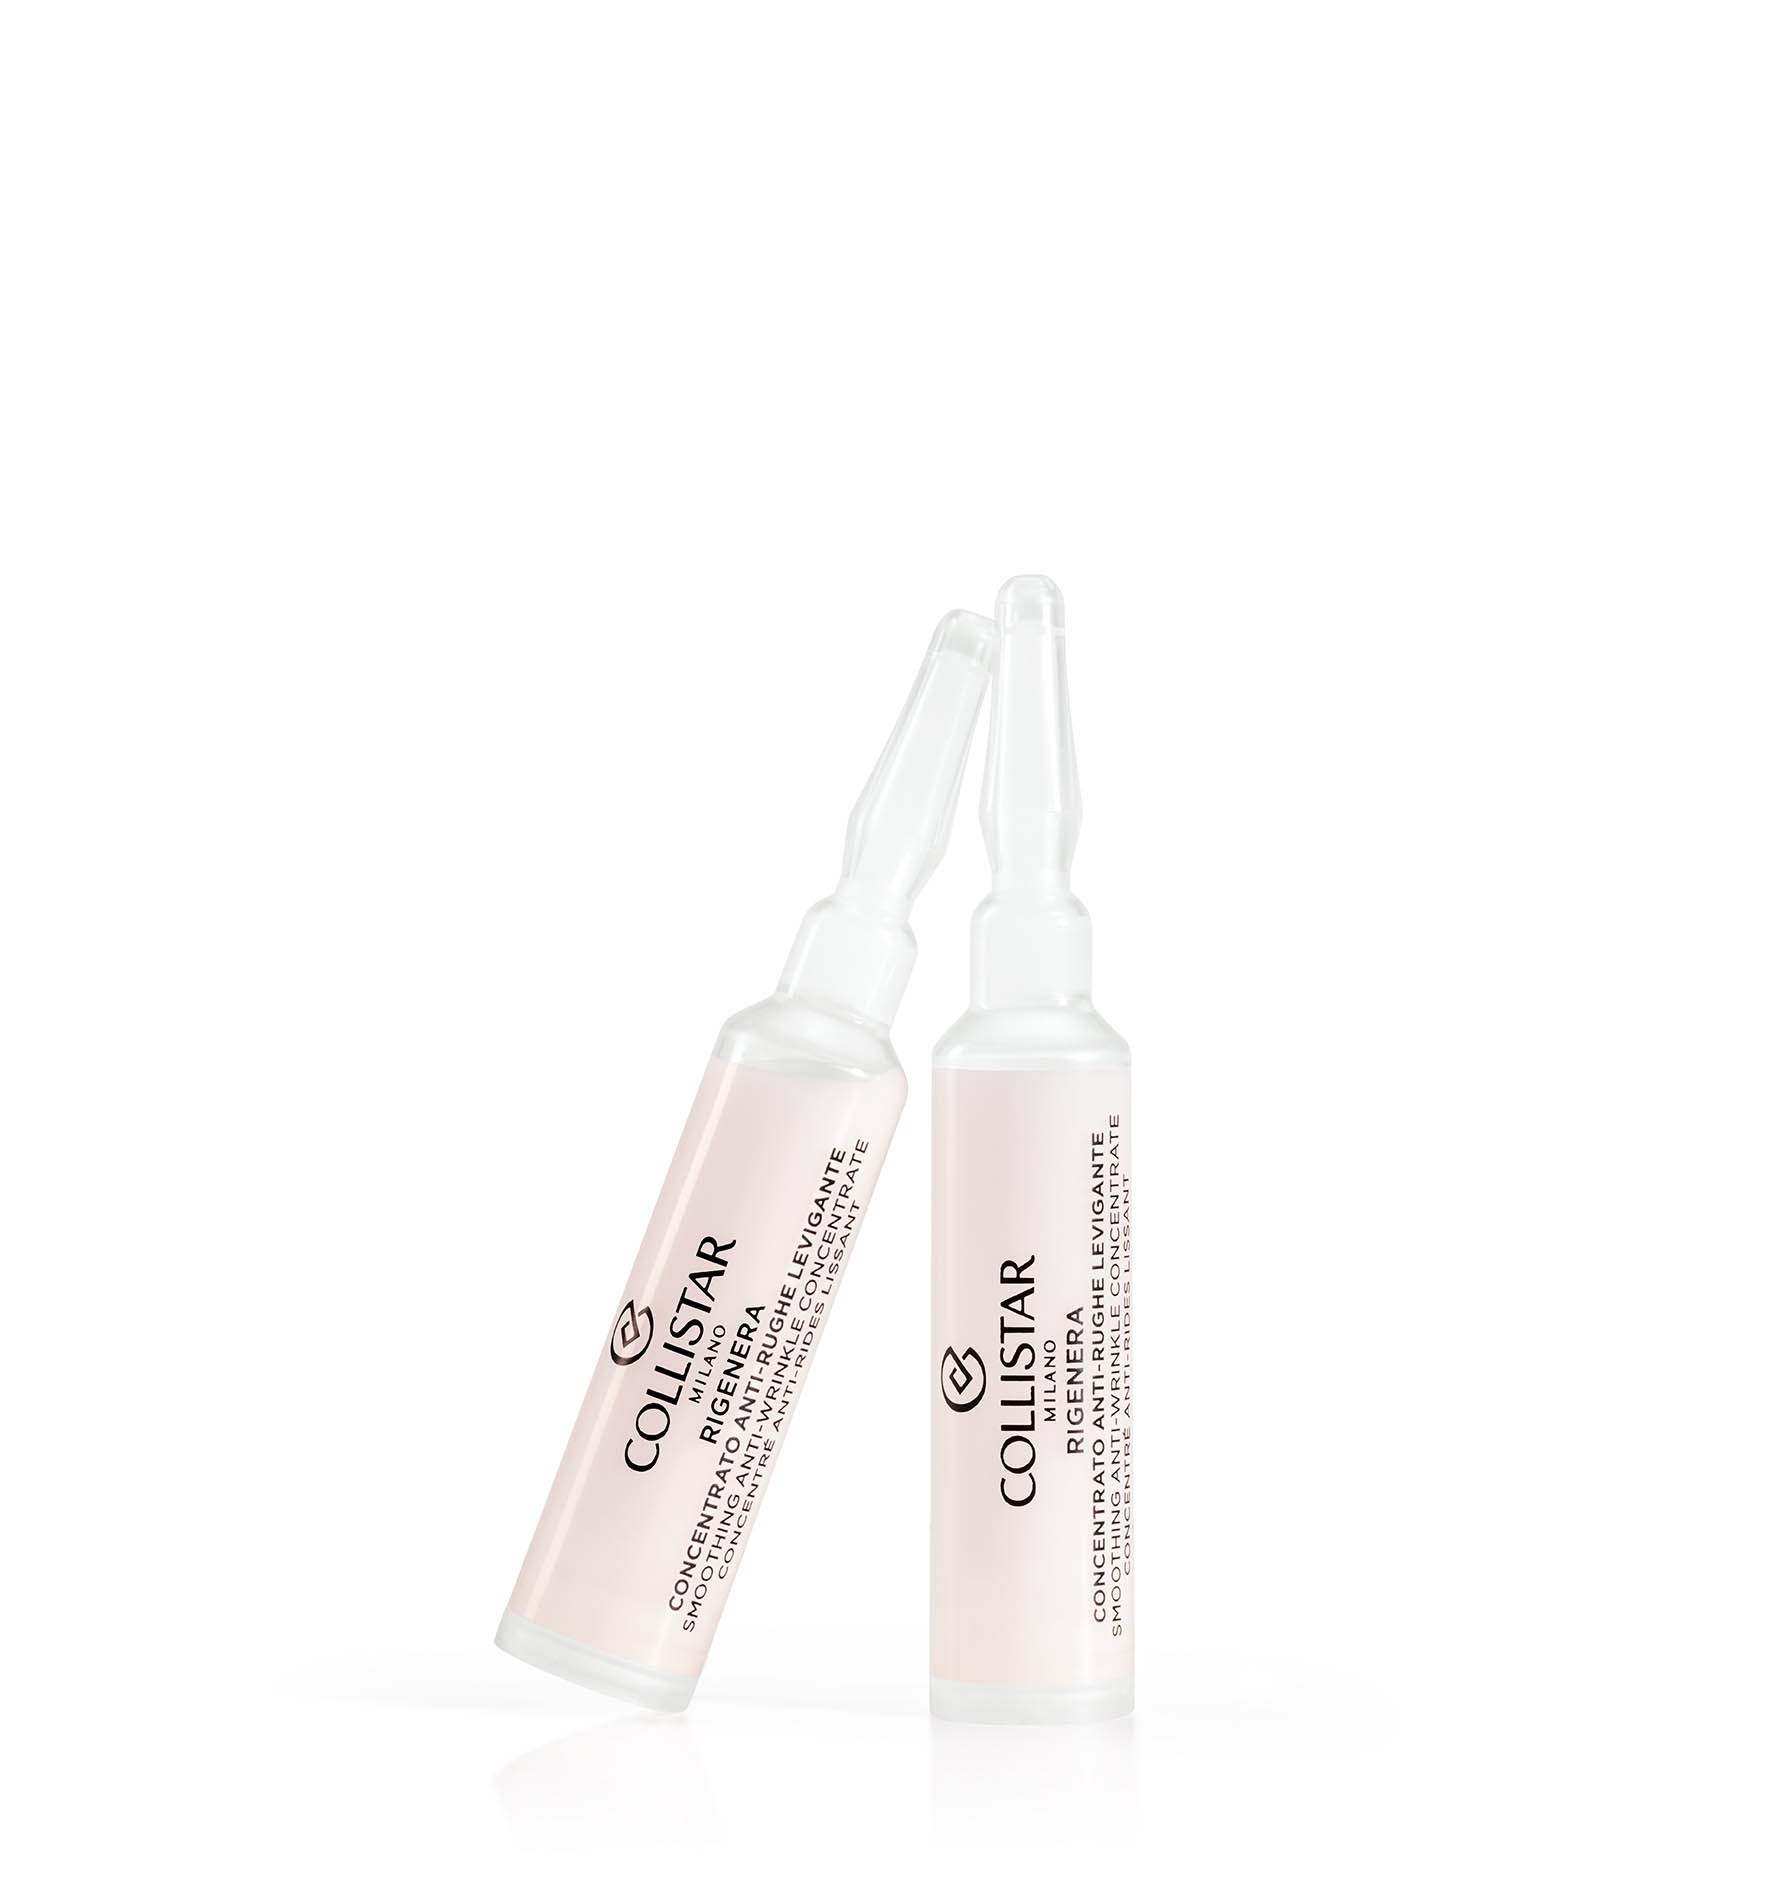 RIGENERA SMOOTHING ANTI-WRINKLE CONCENTRATE - GEZICHT | Collistar - Shop Online Ufficiale